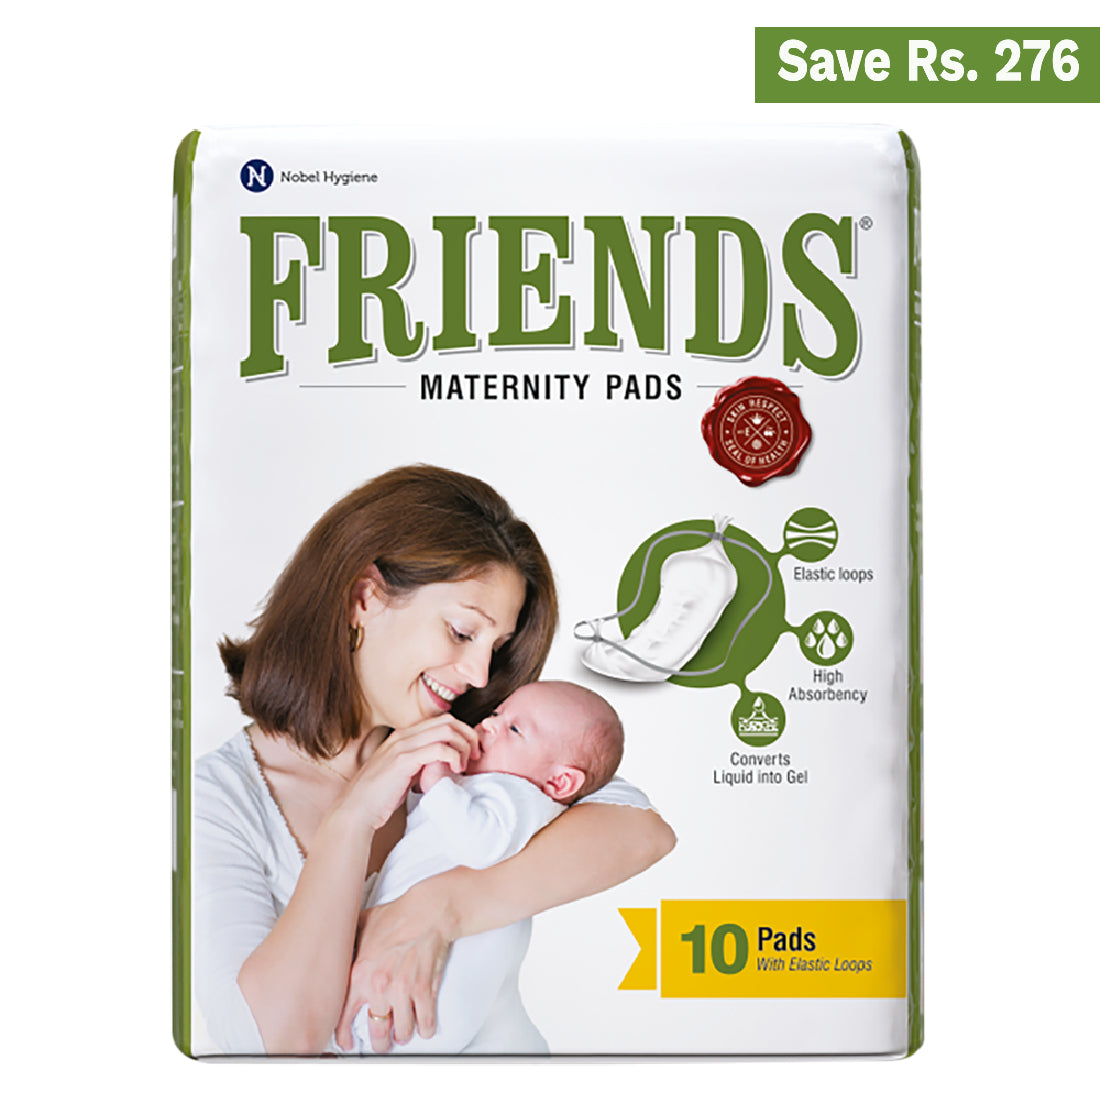 Super Absorbent Maternity Pads - Precious Delivery